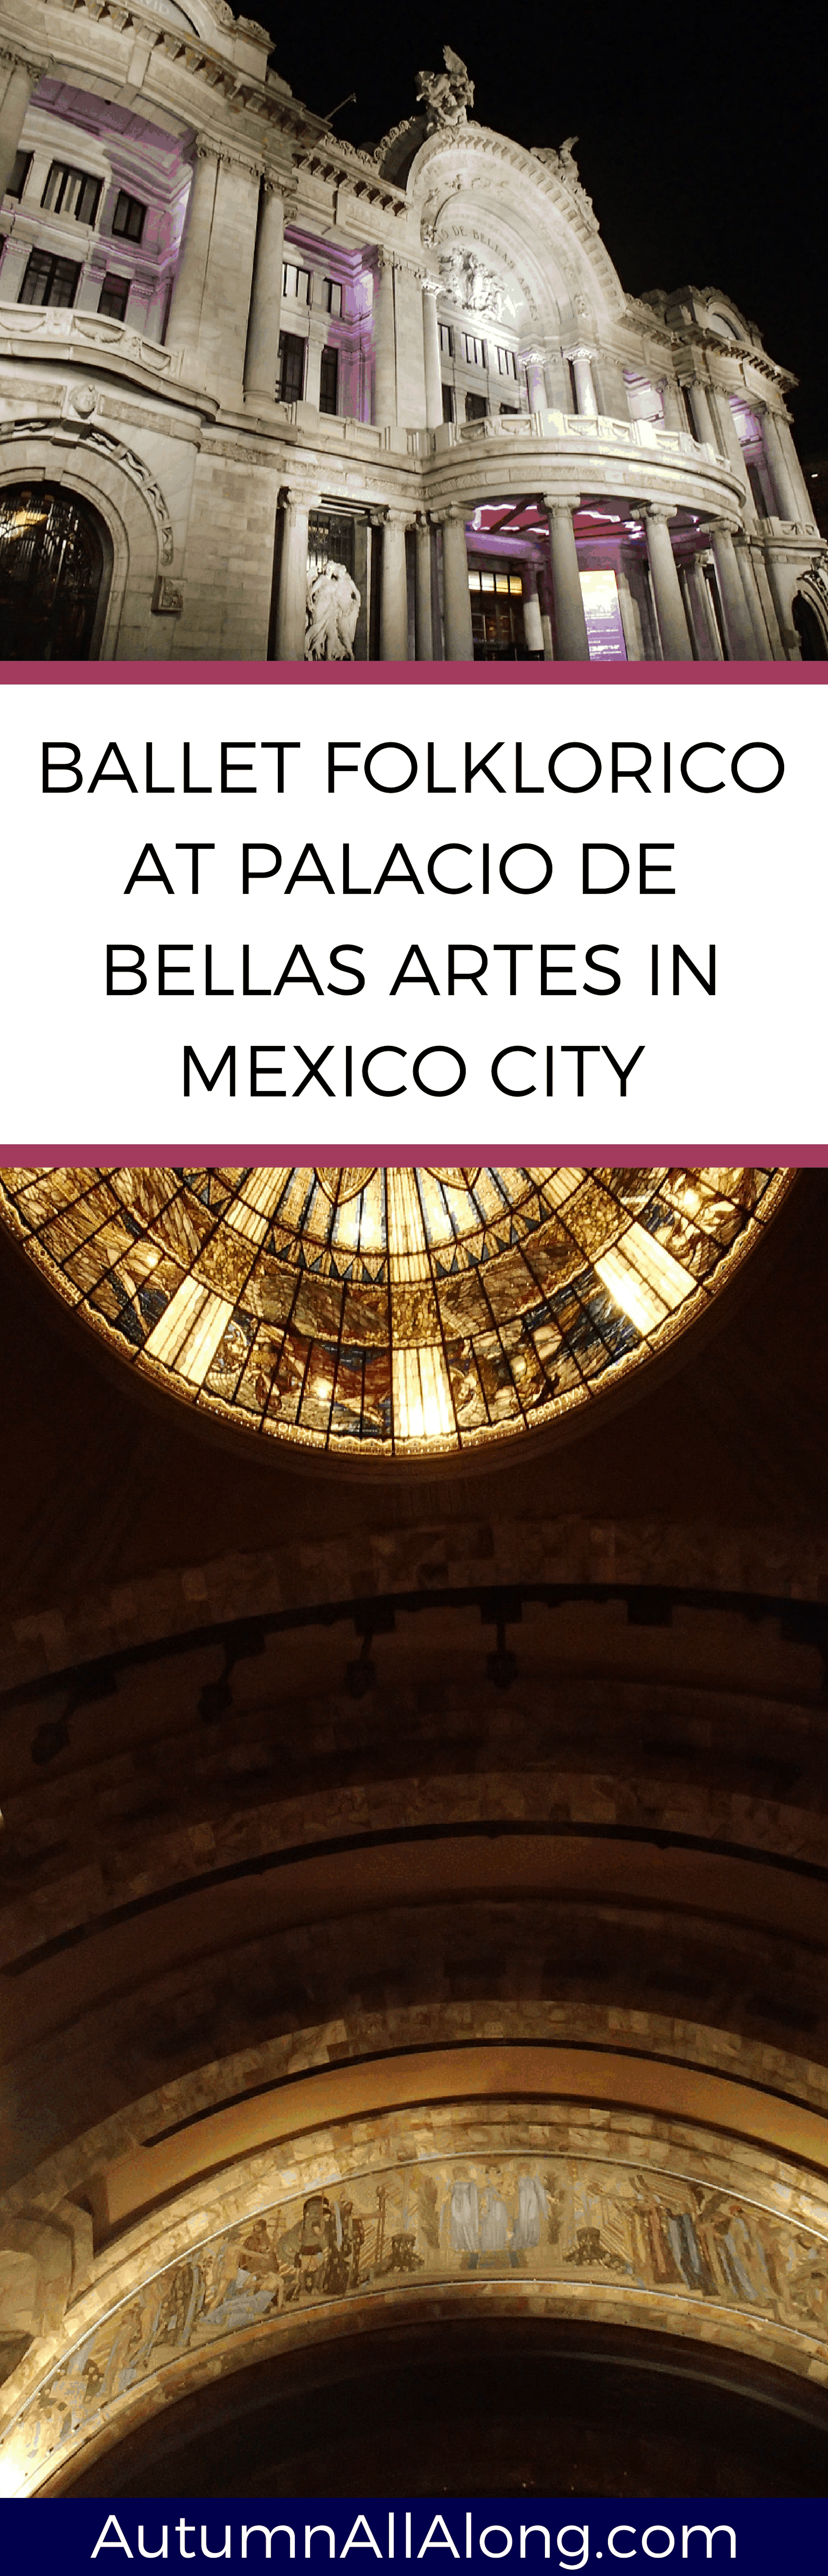 The Ballet Folklorico in Mexico City is a traveling dance troupe that merges culture of Mexico and history. I definitely recommend it! | via Autumn All Along